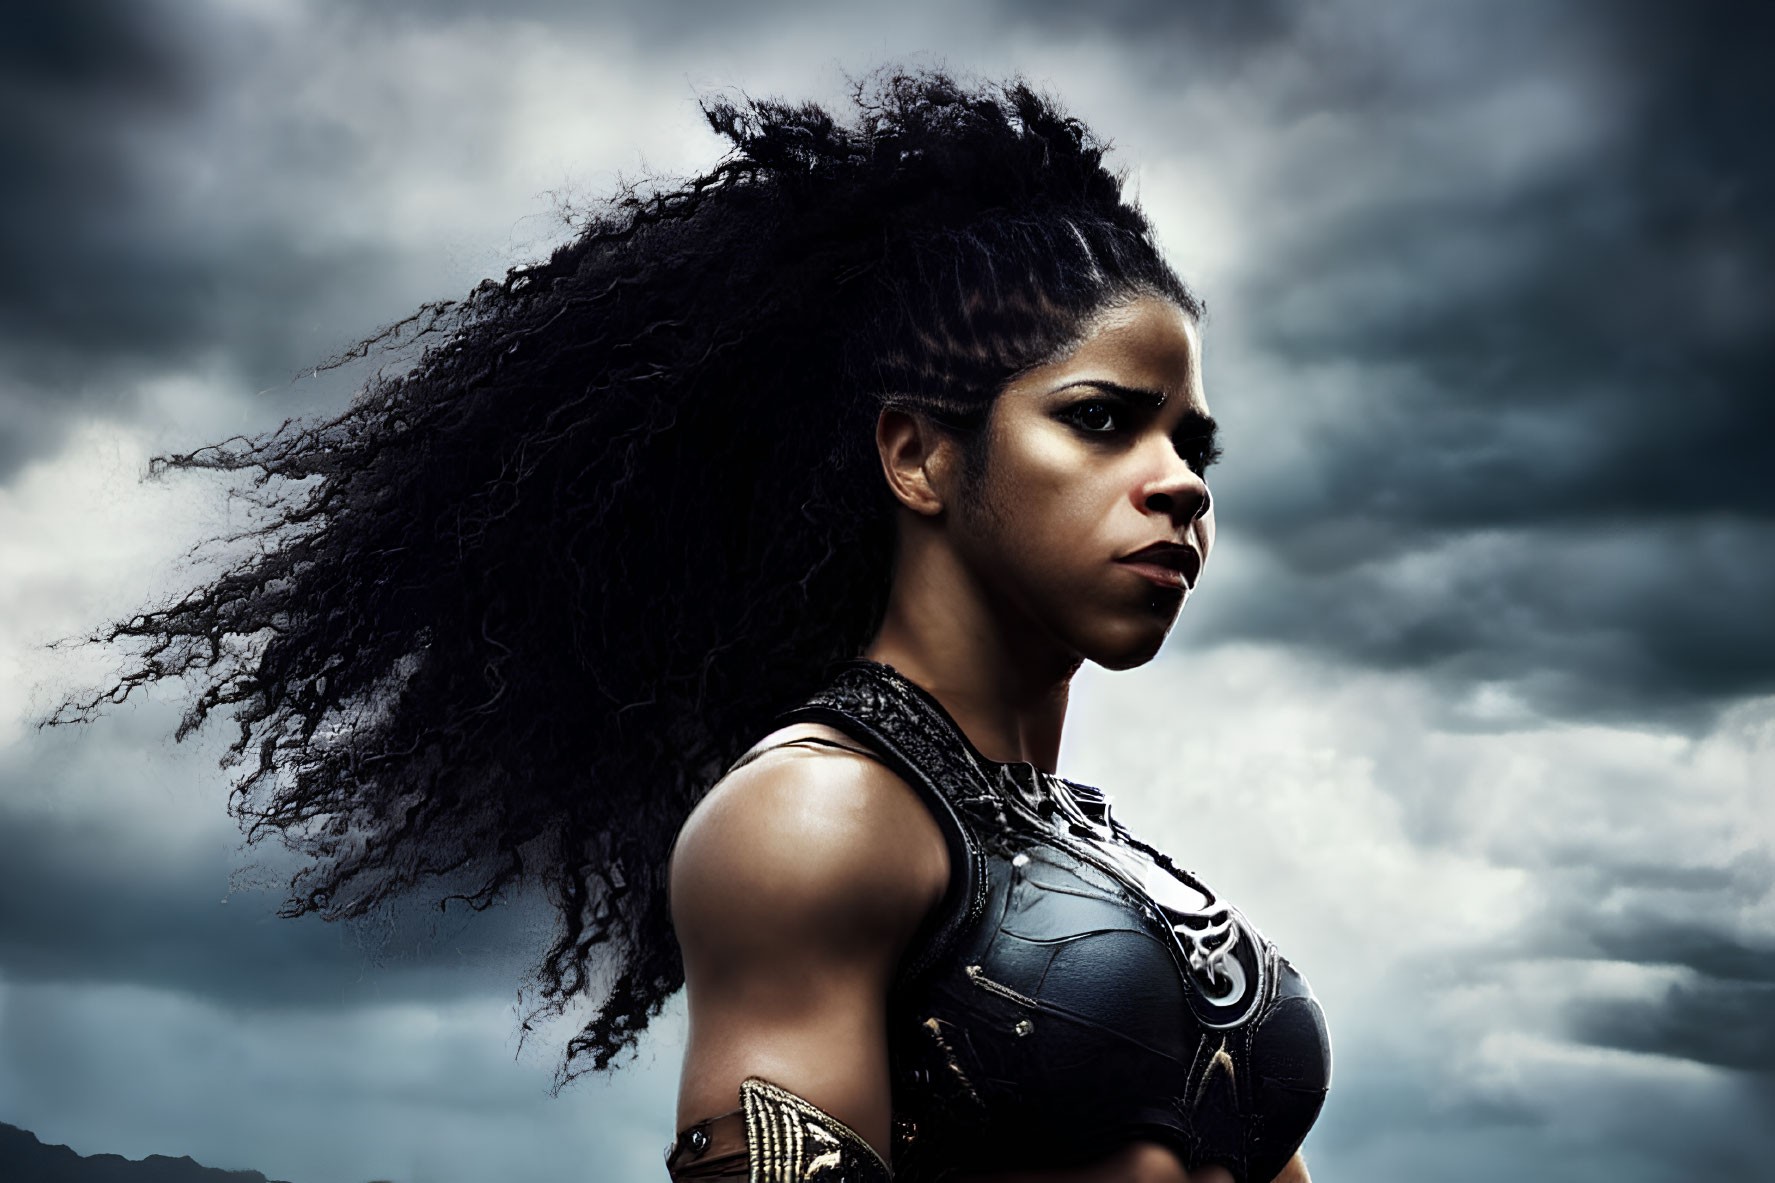 Curly-haired woman in warrior attire against stormy sky.